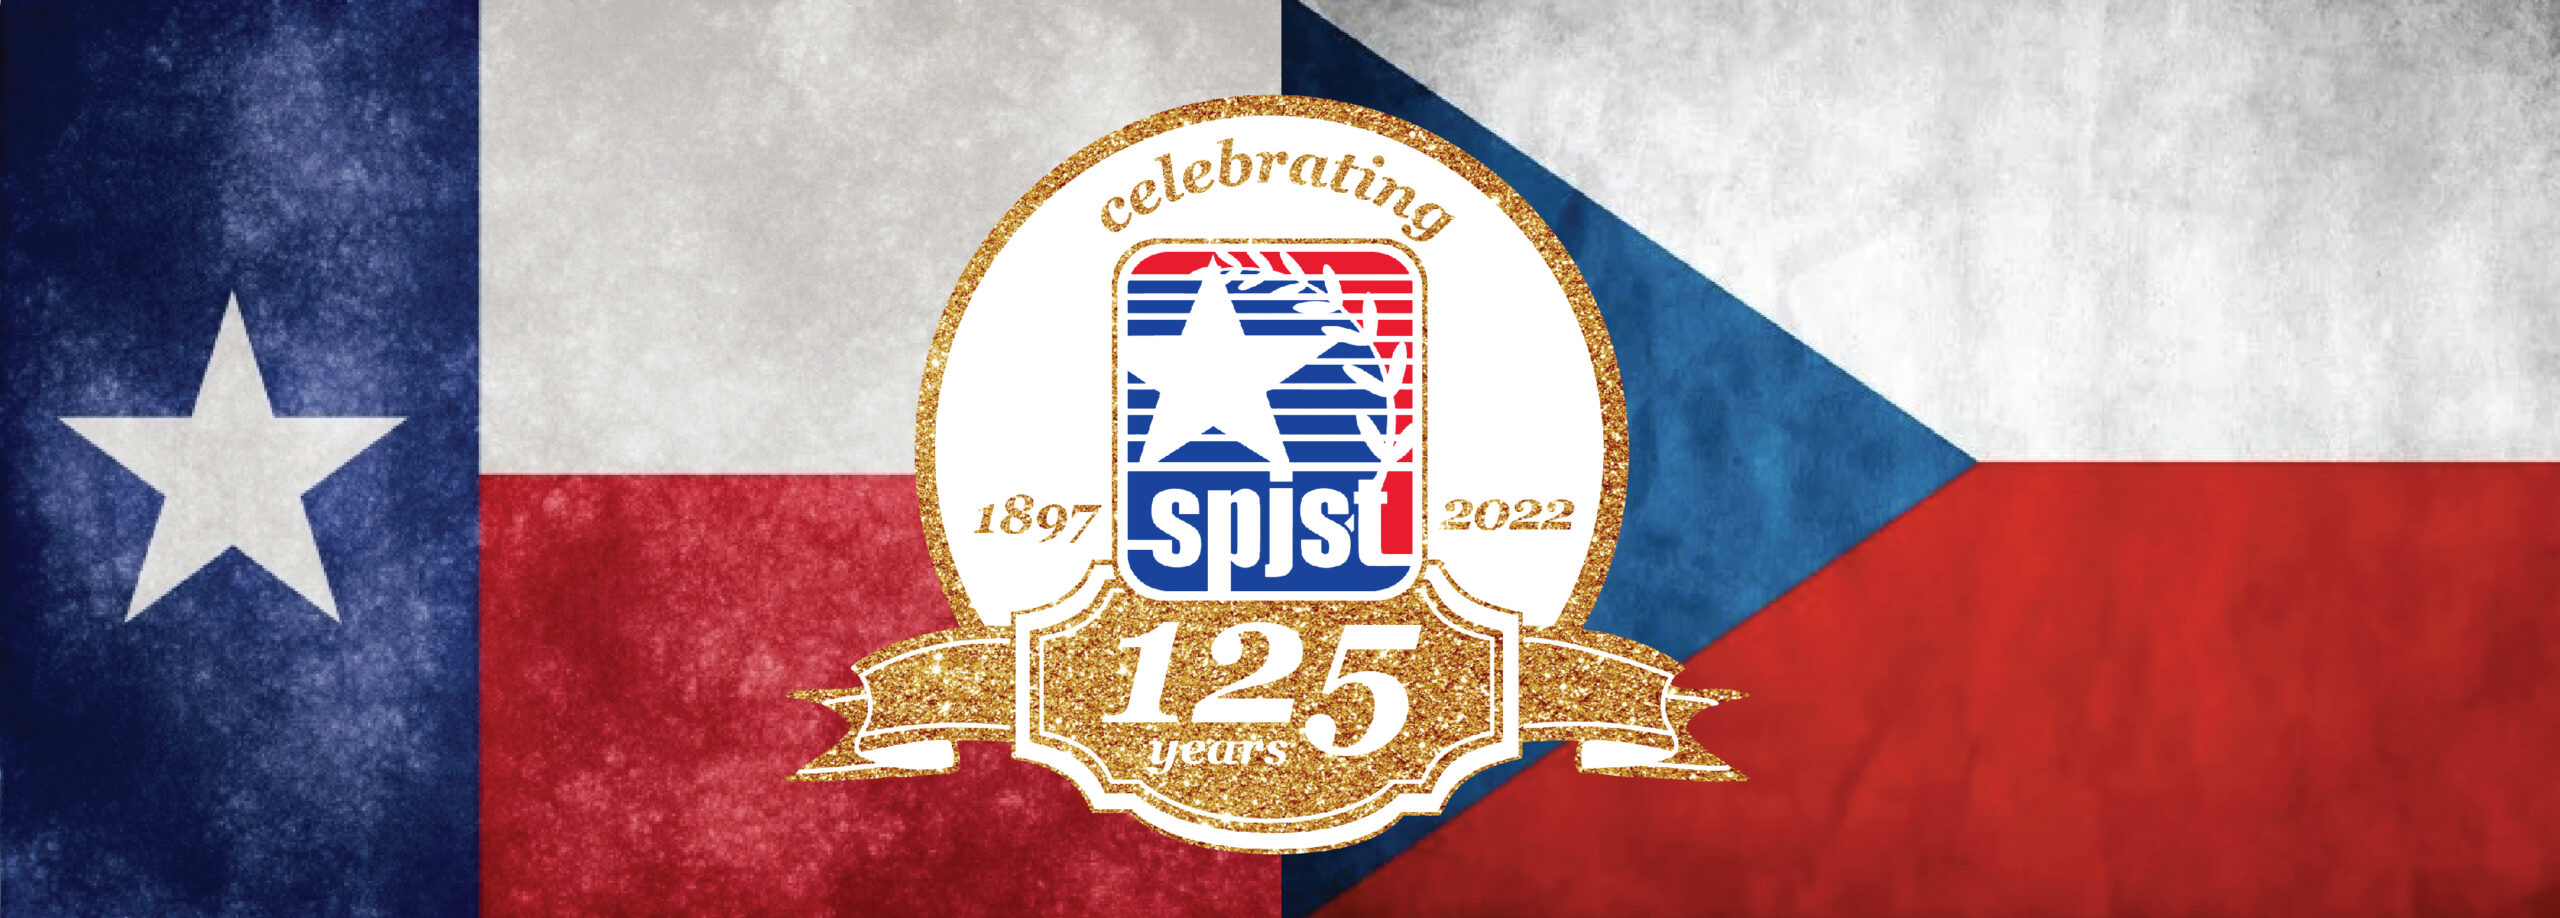 https://spjst.org/wp-content/uploads/2022/02/125Anniversary-spjst-fb-cover-scaled.jpg